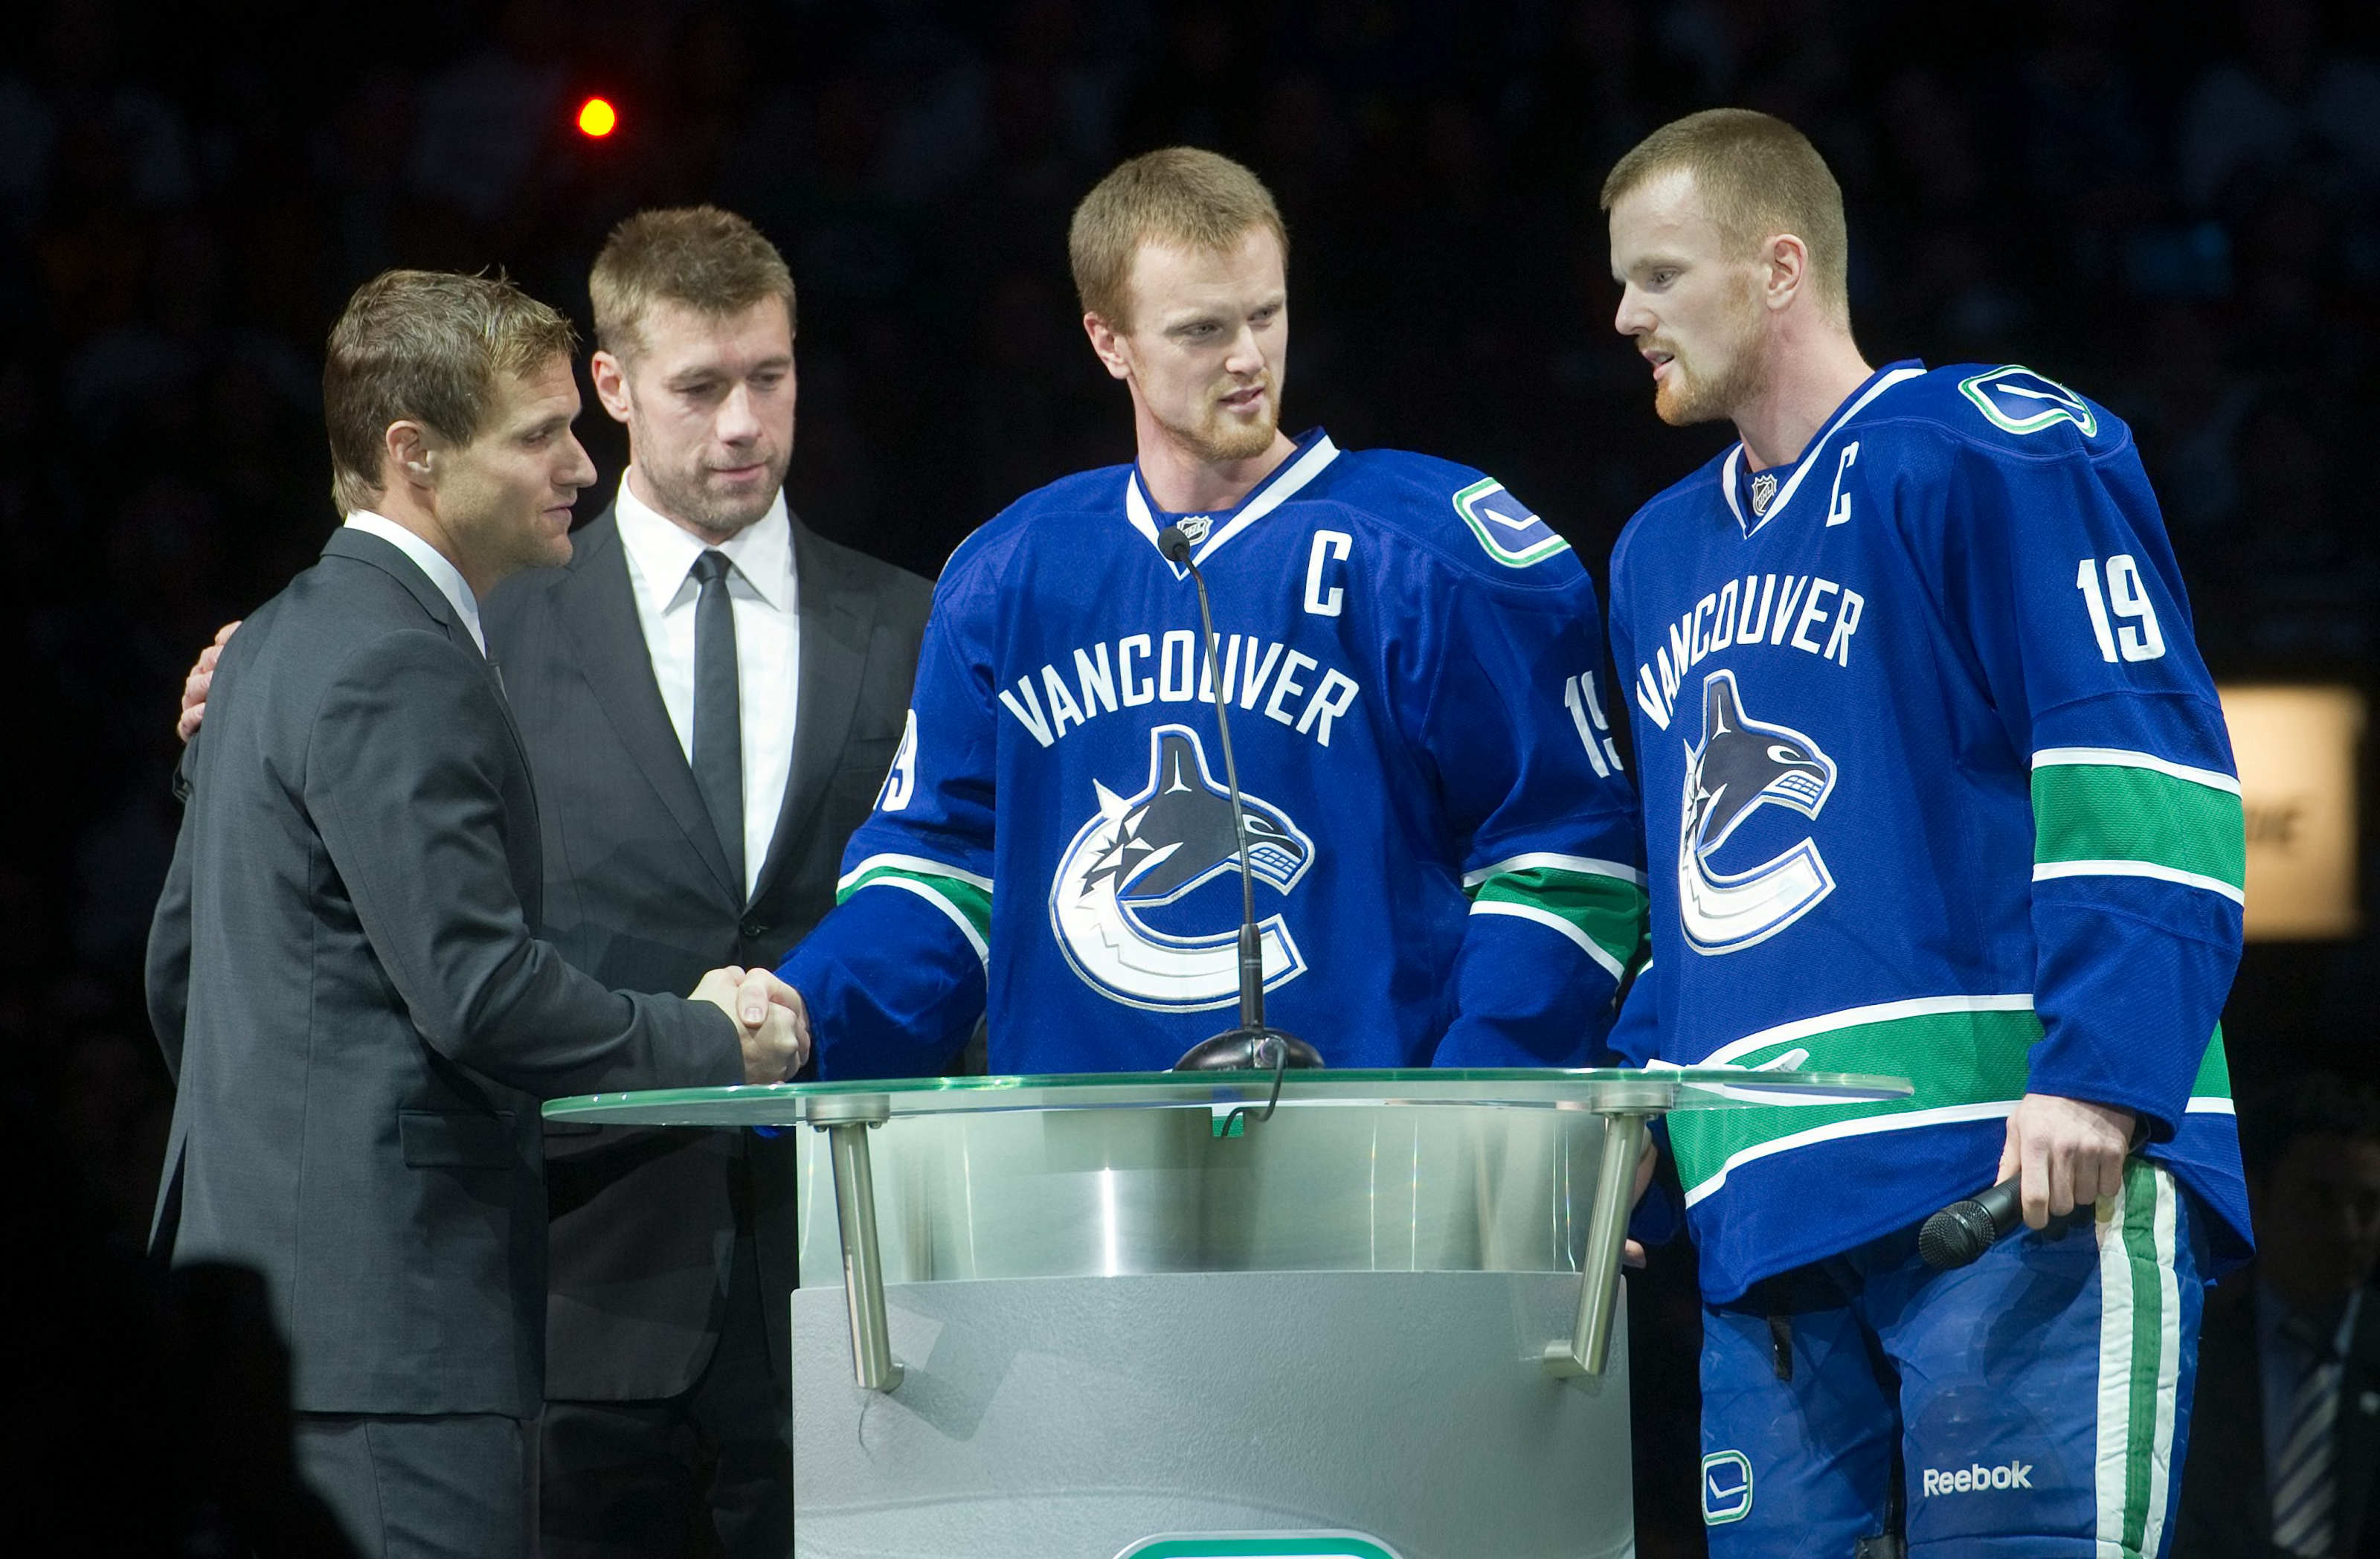 Pavel Bure to have jersey retired by Vancouver Canucks - BC